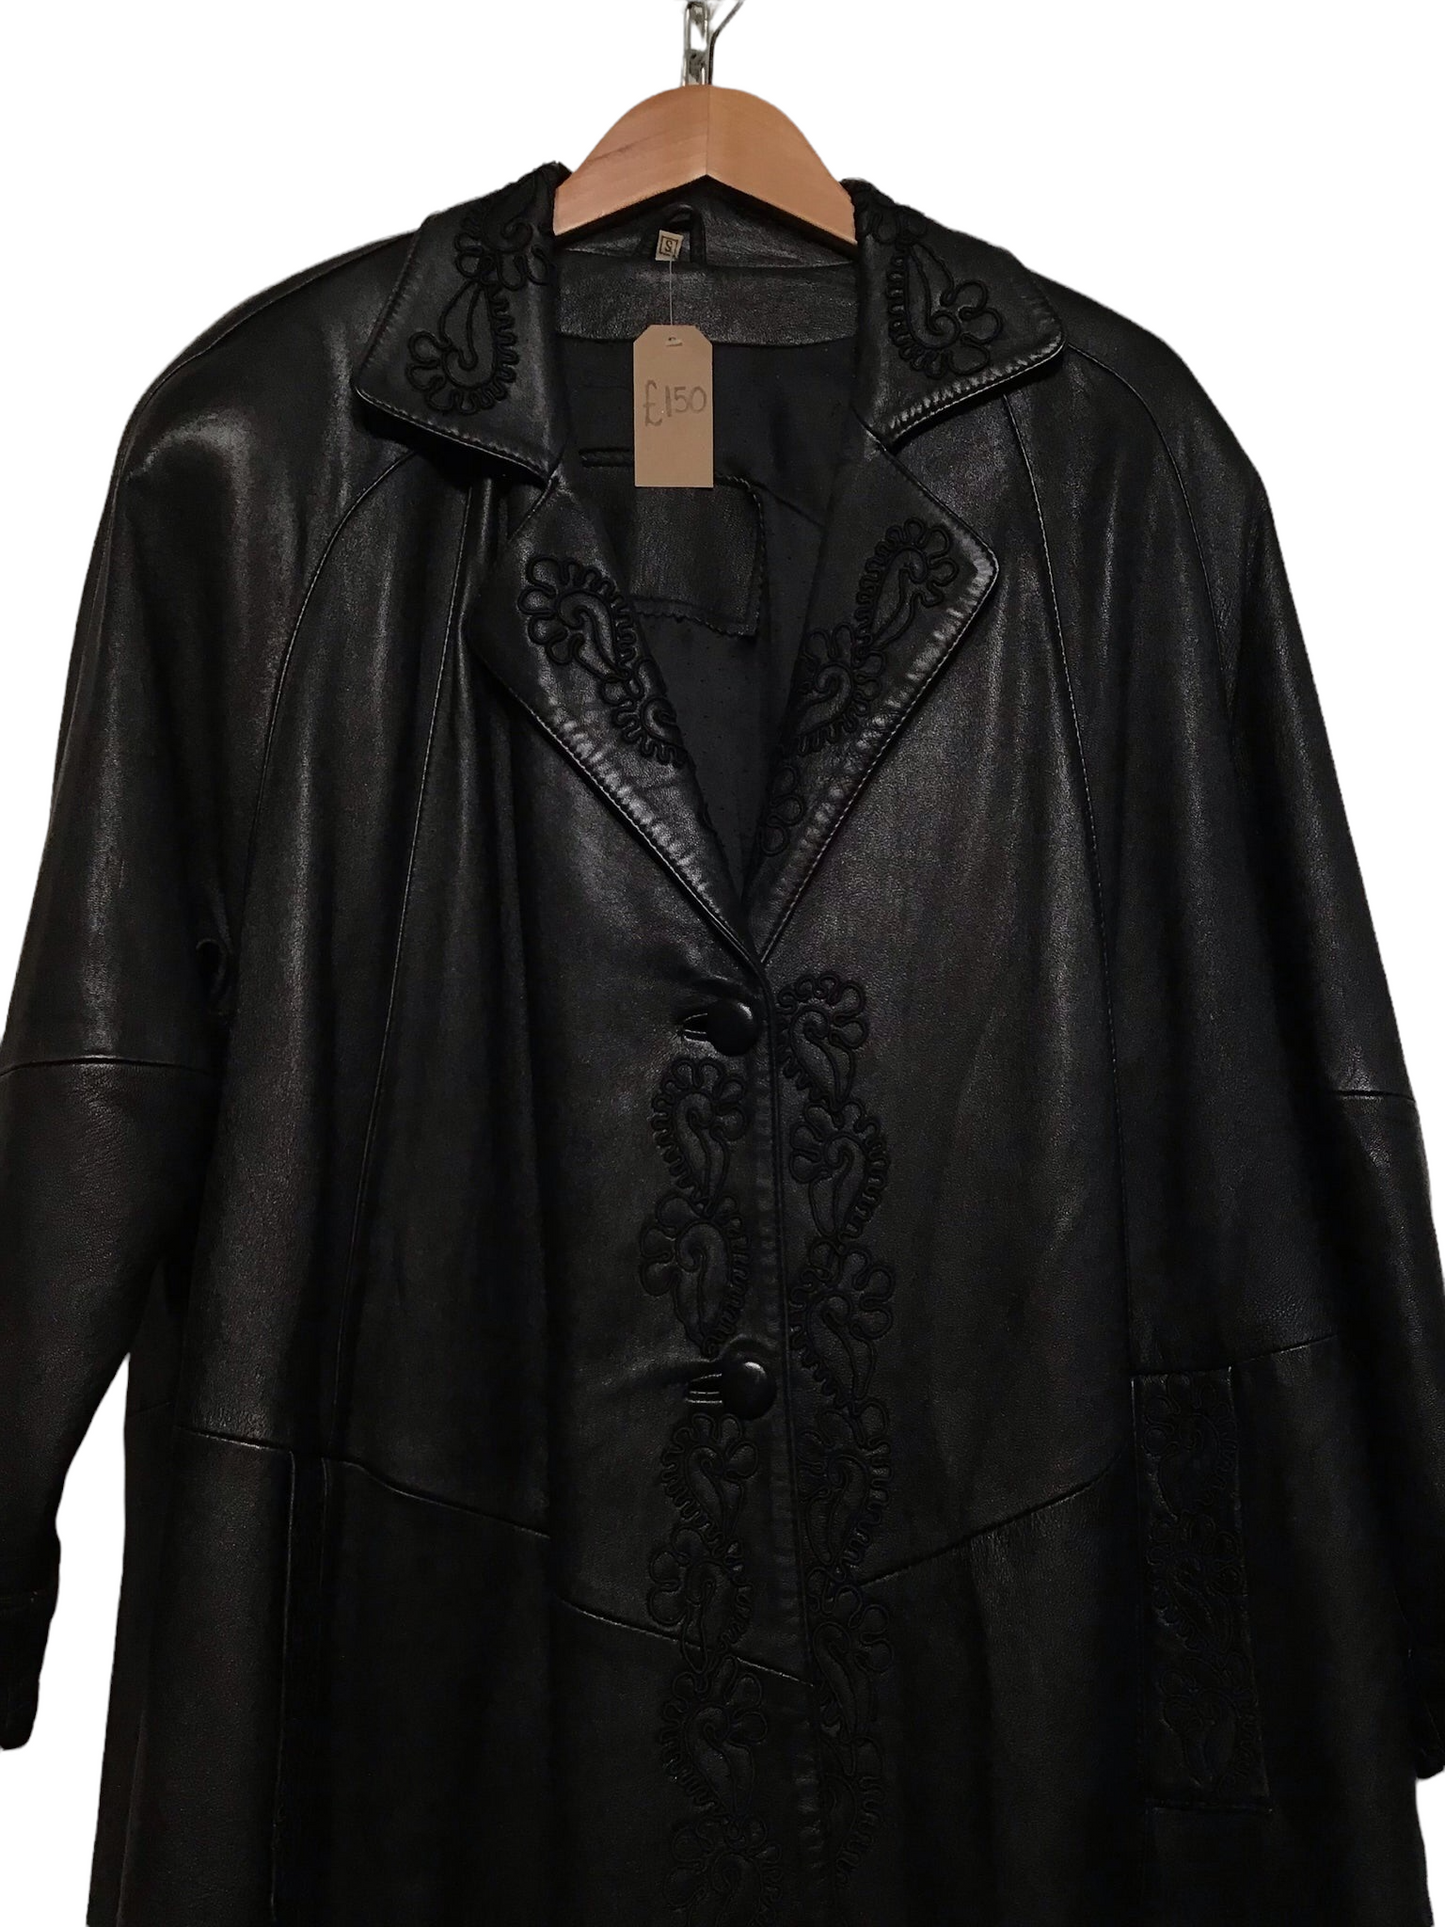 Embroidered Leather Jacket (Size L)